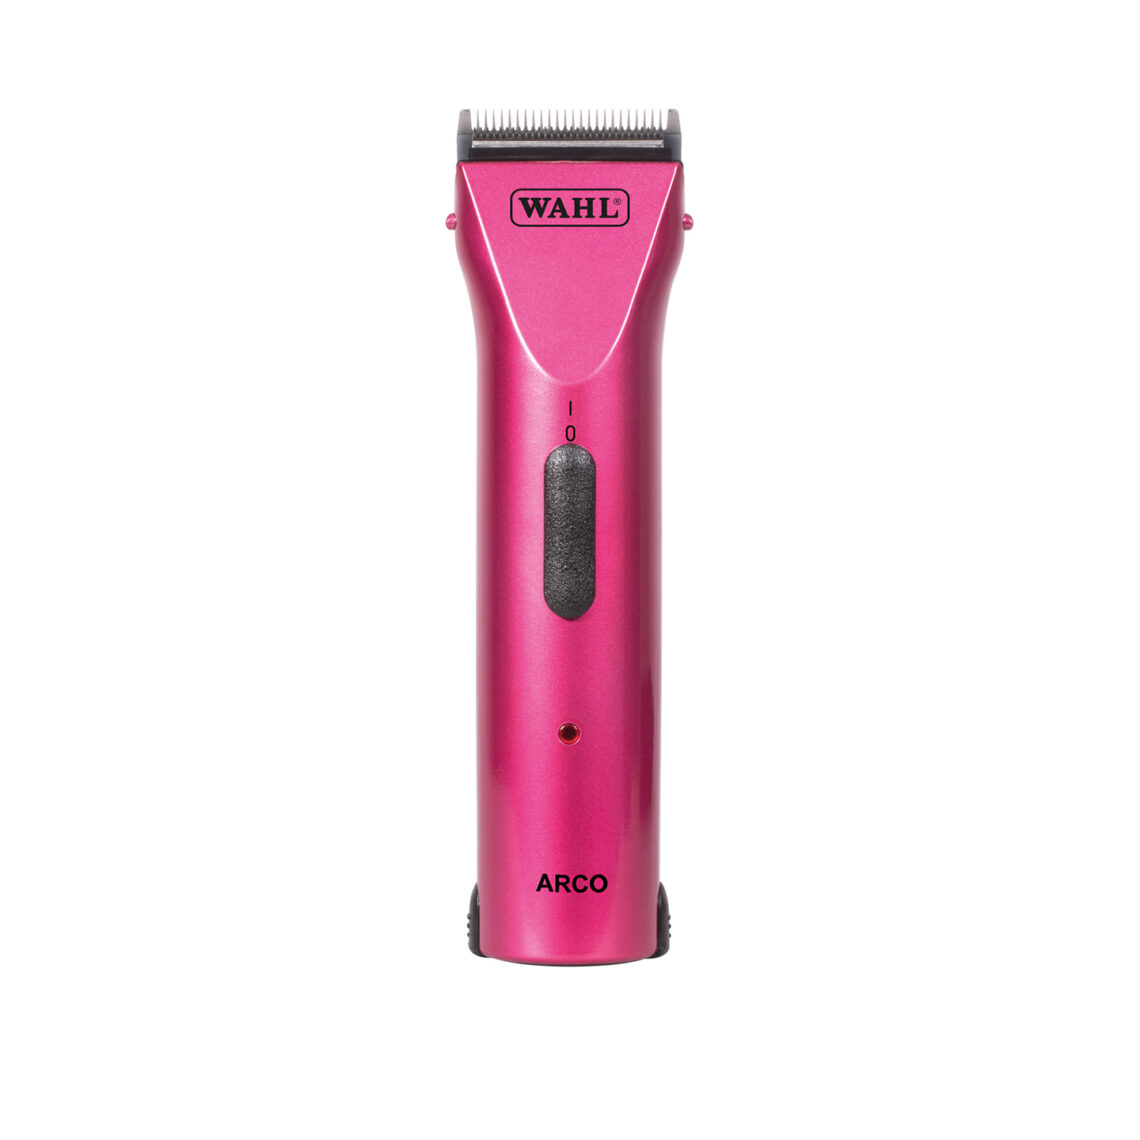 wahl pet grooming clippers